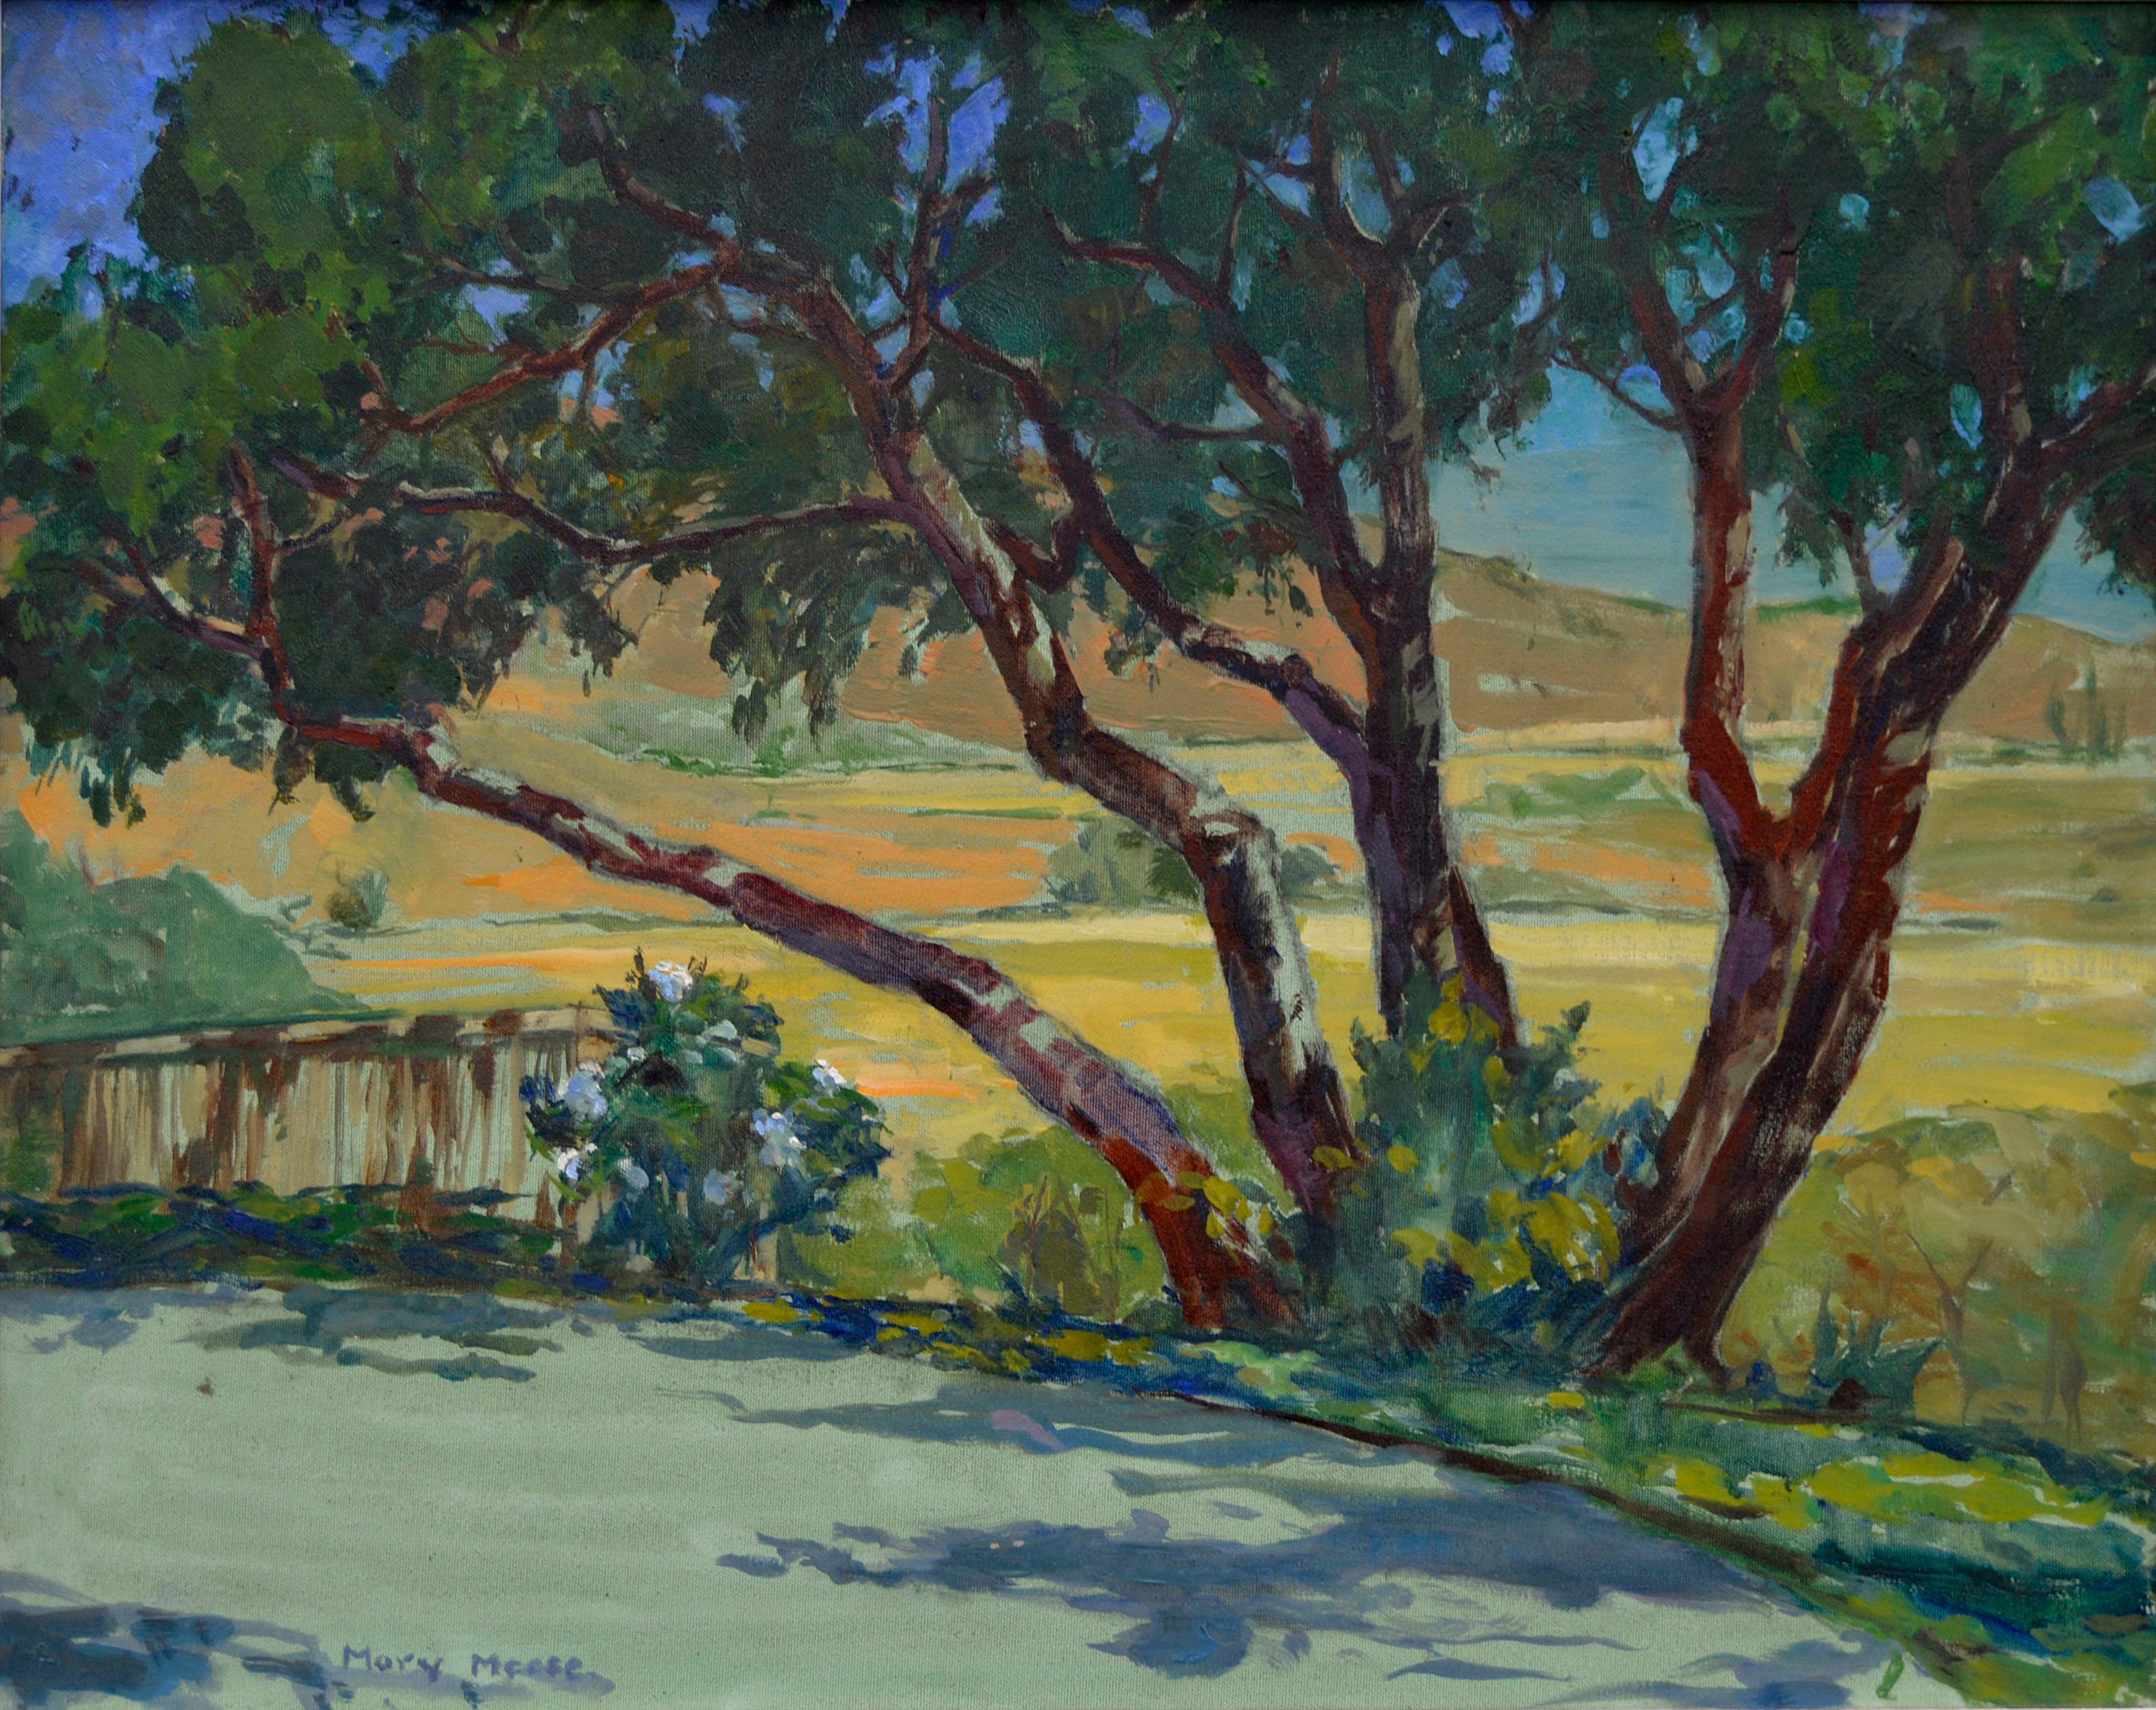 California Rural Road Landscape - Painting by Mary Melody Meese